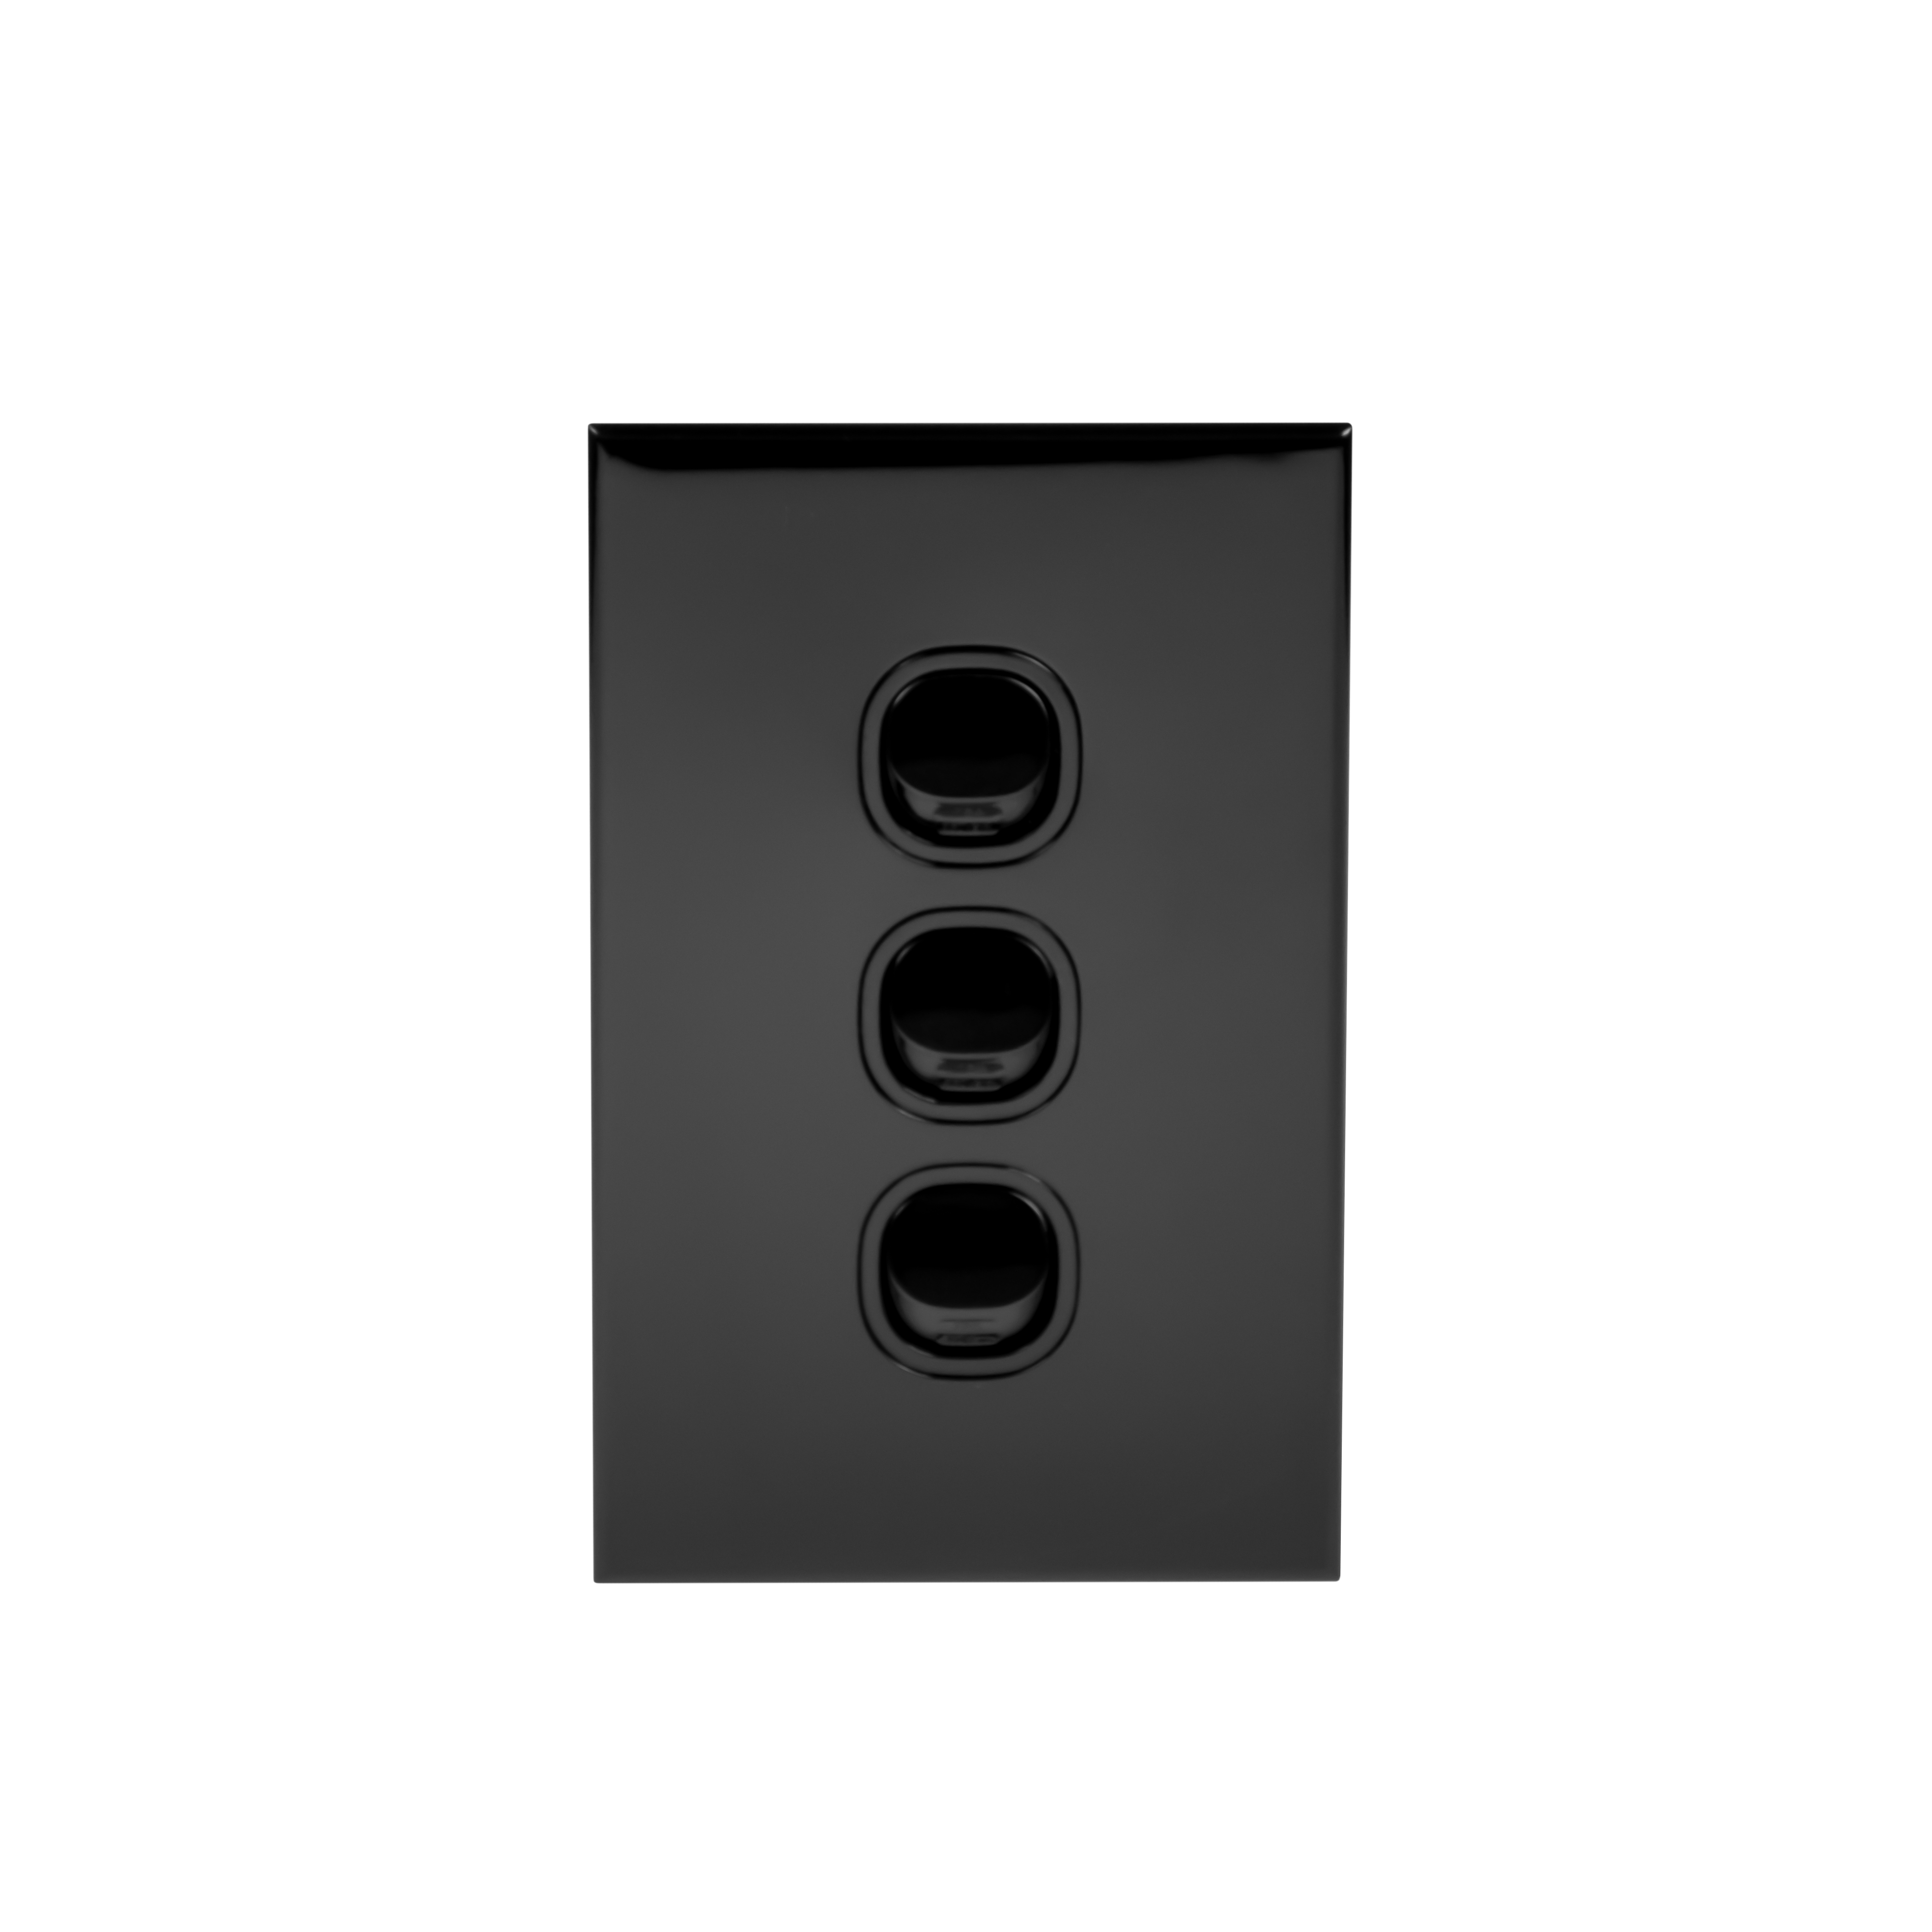 16A, 3 Gang Switch, Black, Home